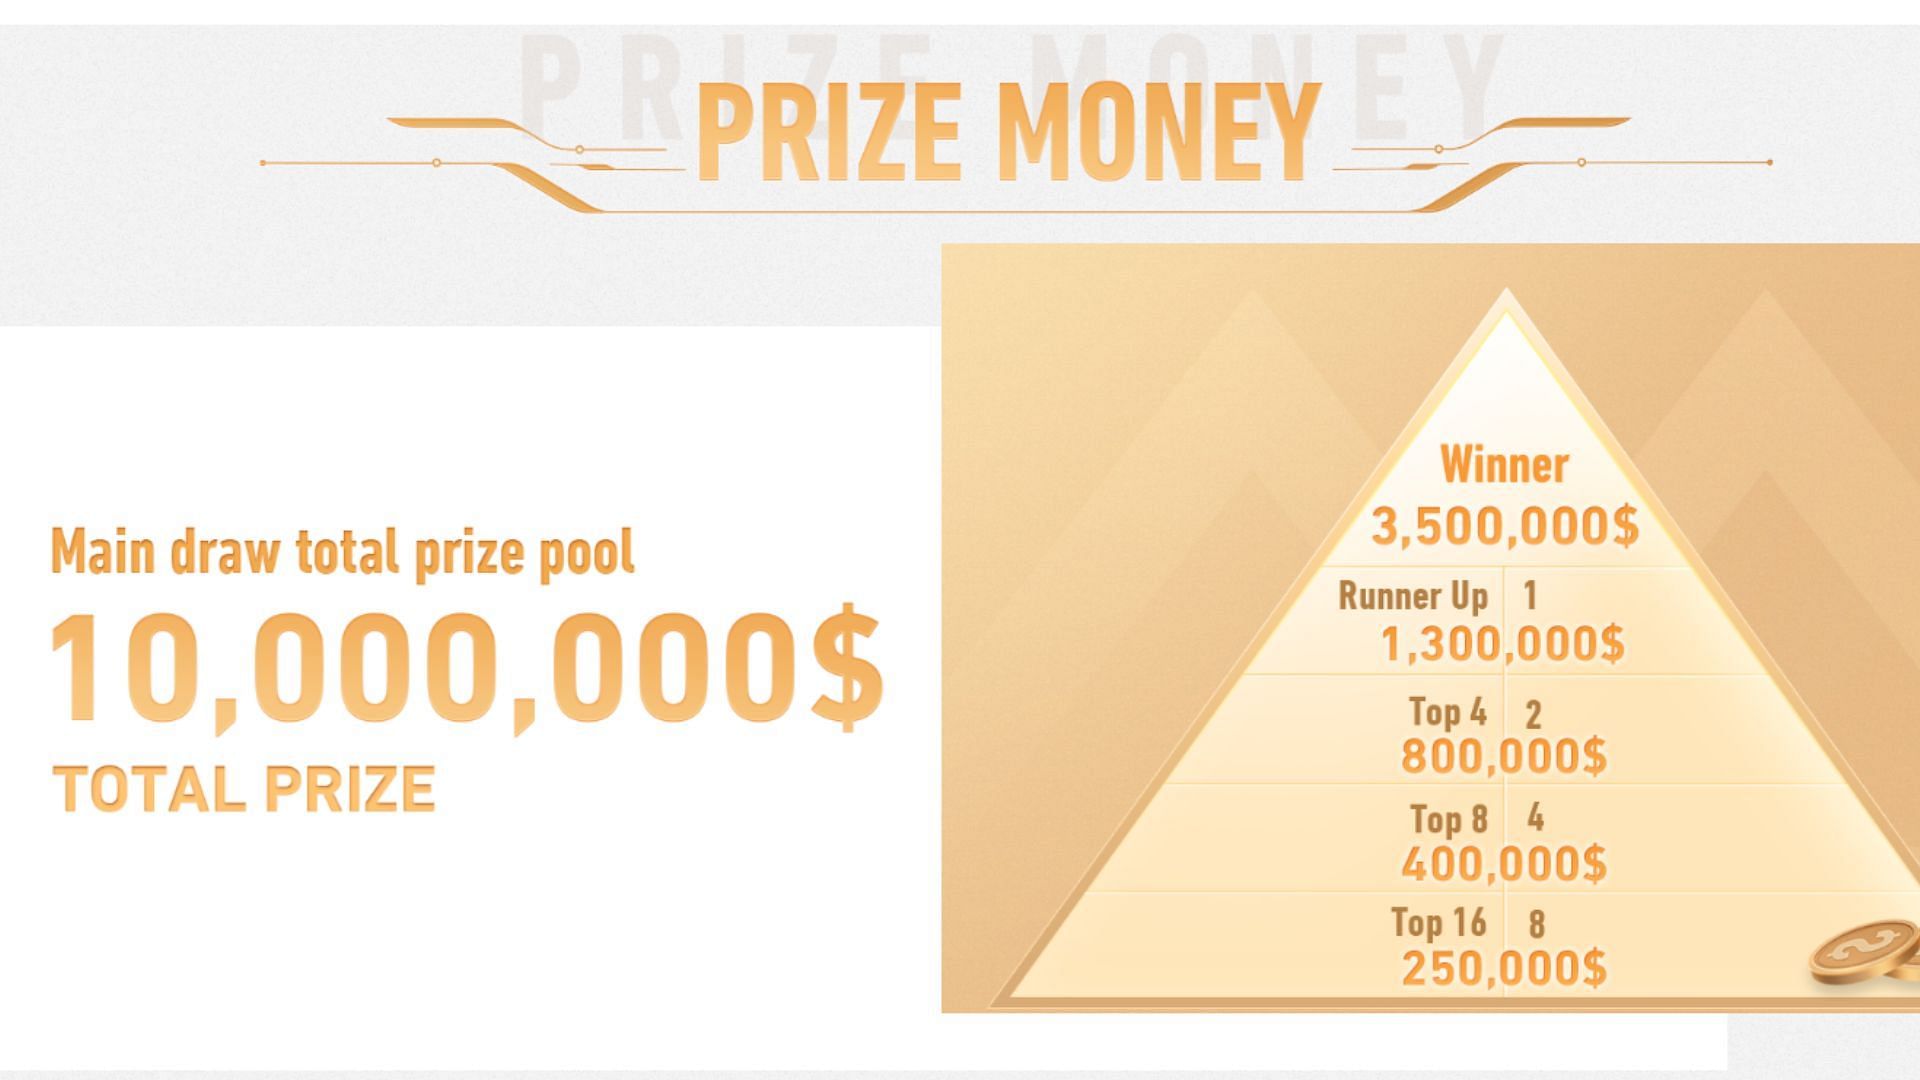 Prize Pool distribution of Honor of Kings International Championship (Image via official website)